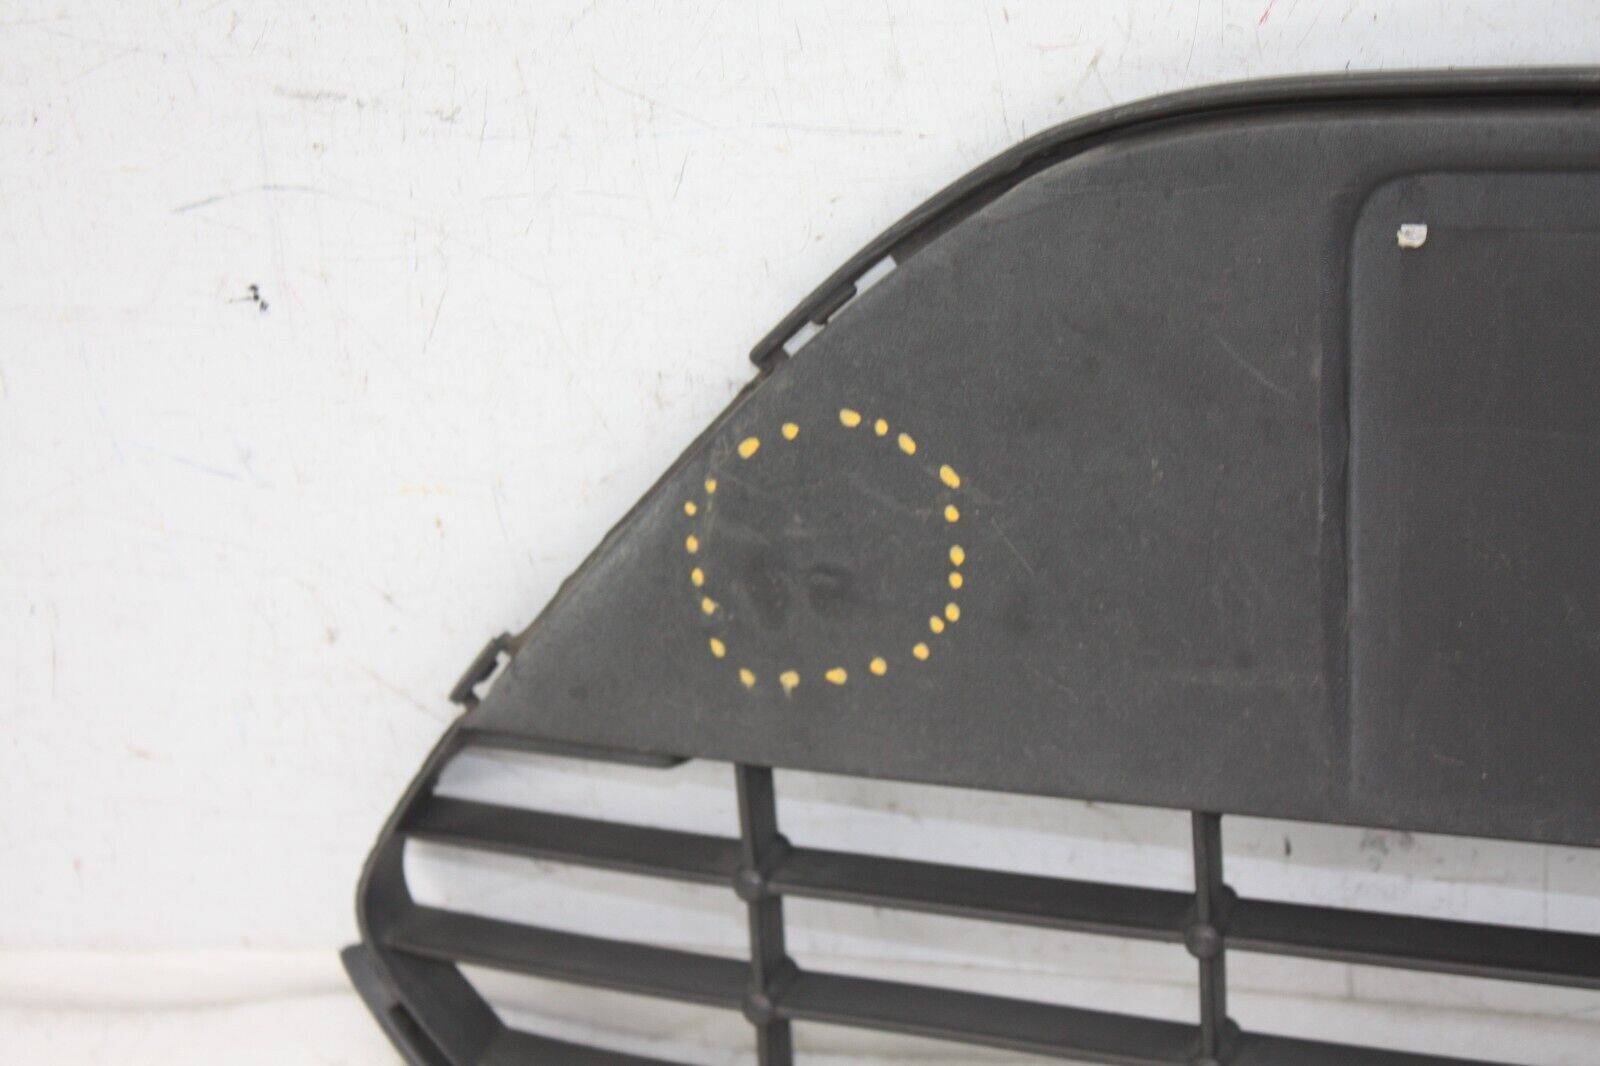 Ford-Focus-Front-Bumper-Grill-2008-TO-2011-8M51-17B968-BE-Genuine-DAMAGED-176410989719-5